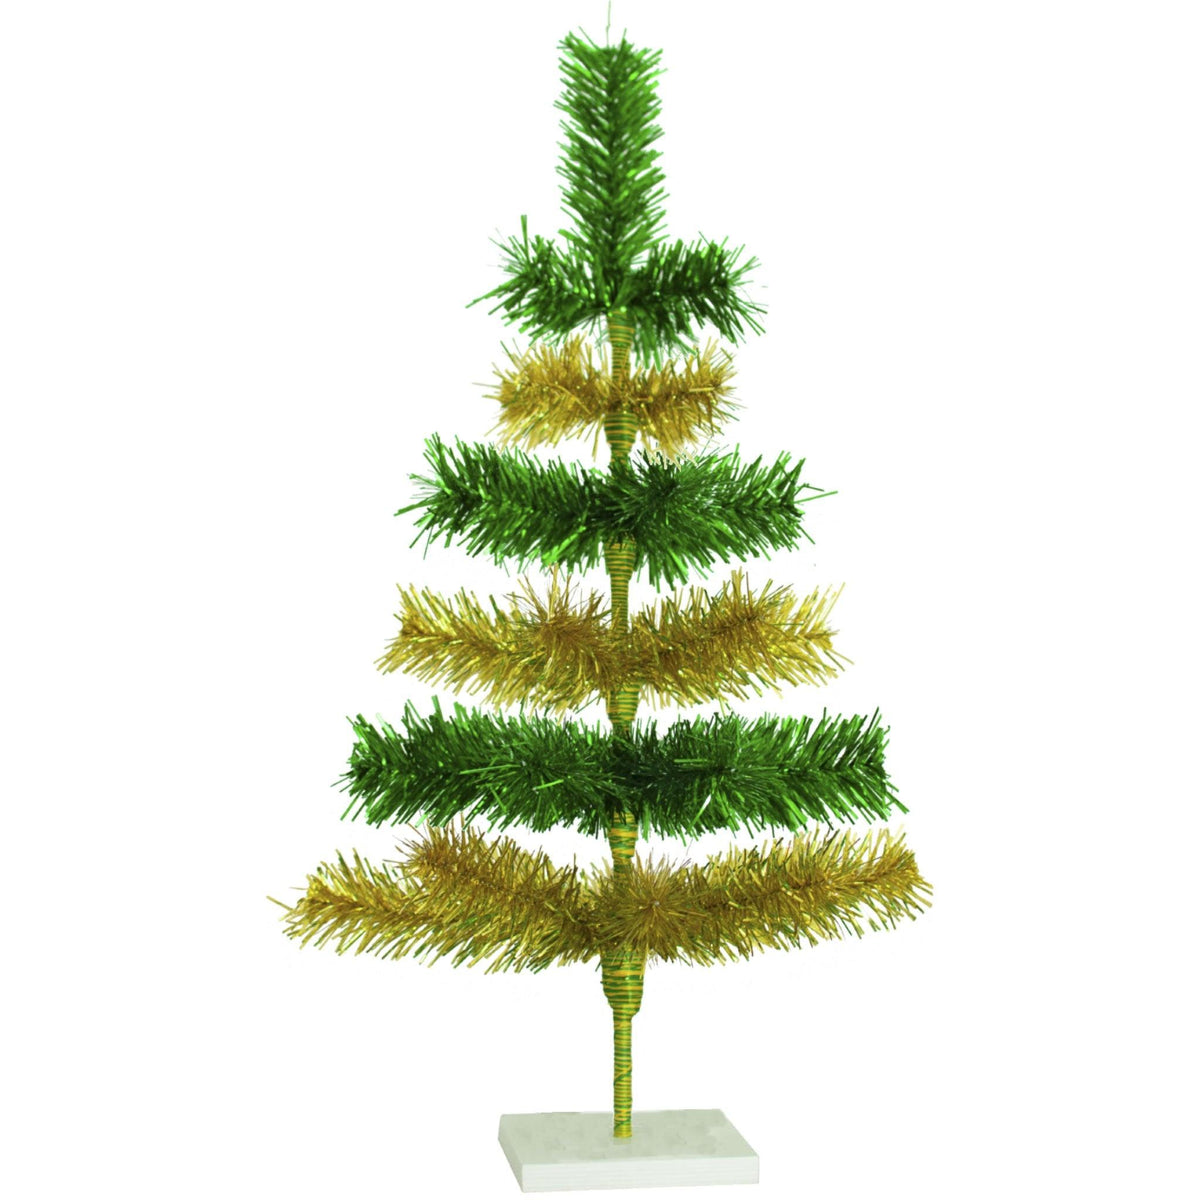 Introducing Lee Display's brand new St. Patrick's Day Themed Christmas Trees made by hand in the USA on sale at leedisplay.com